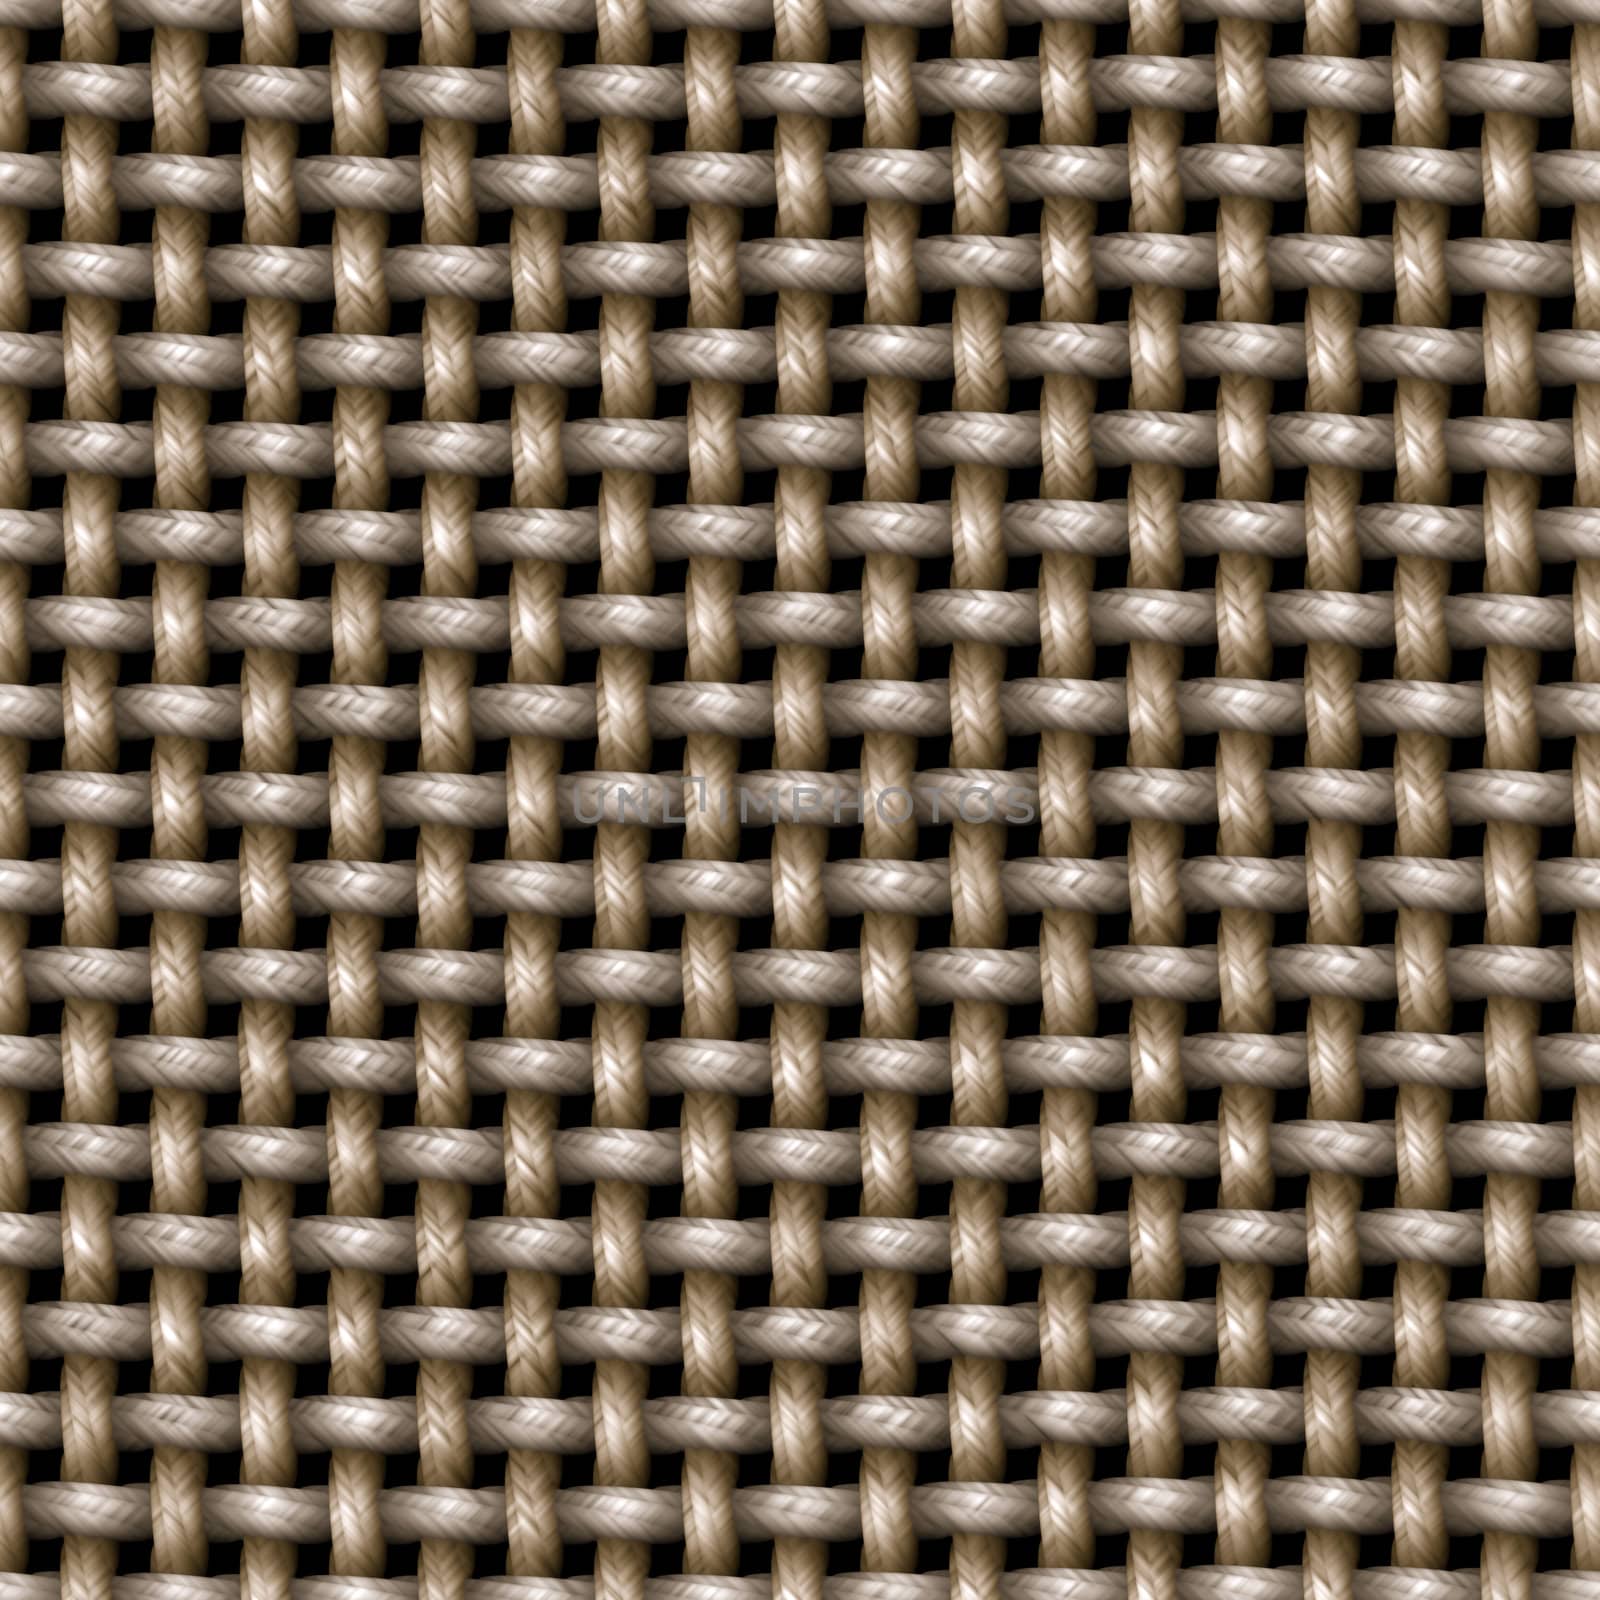 A knitted cloth or burlap texture that tiles seamlessly as a pattern.